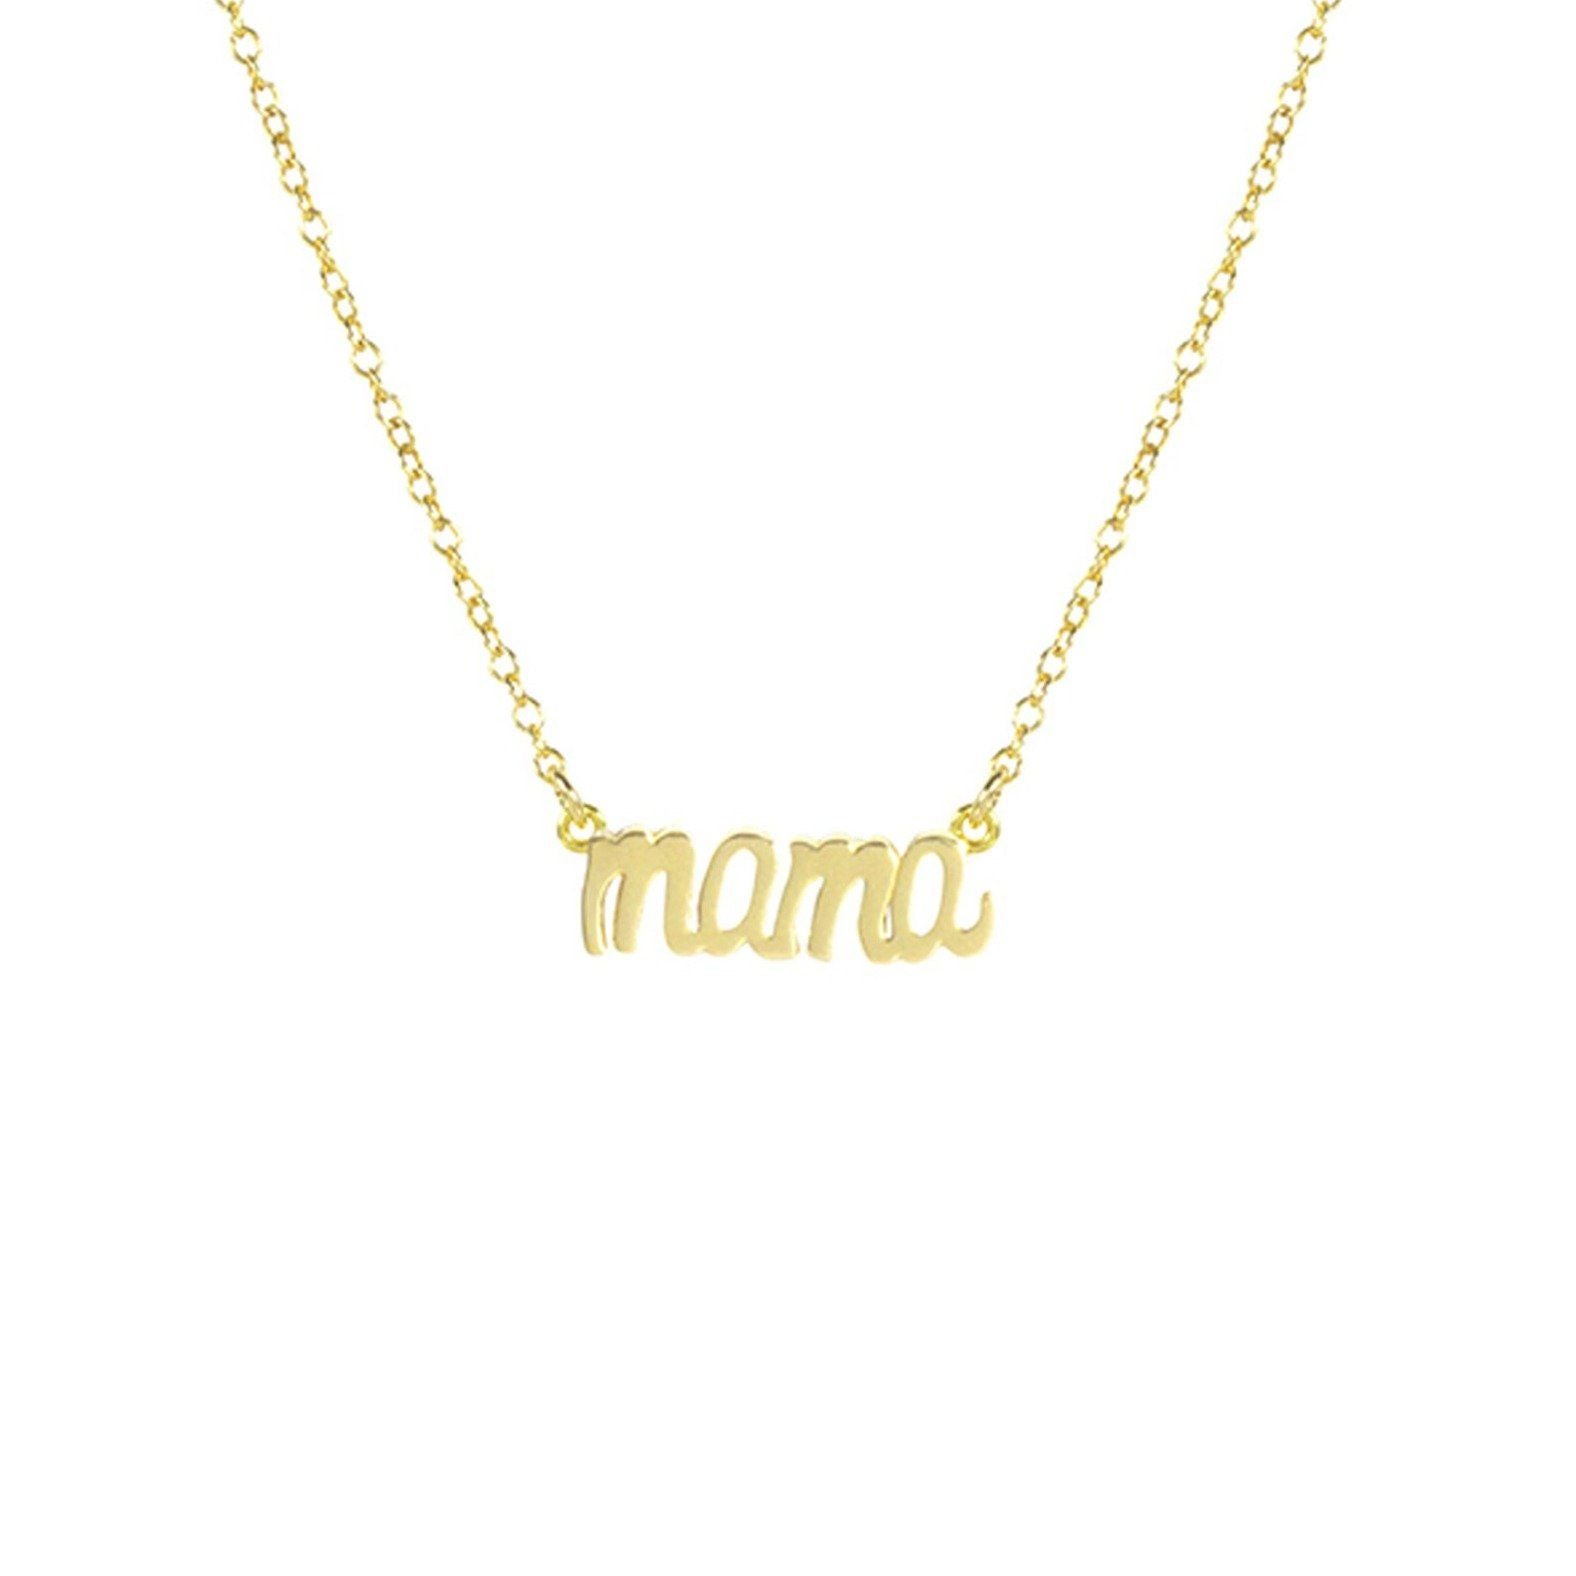 Affordable Jewelry at TJ Maxx | Gallery posted by jenna goldberg | Lemon8